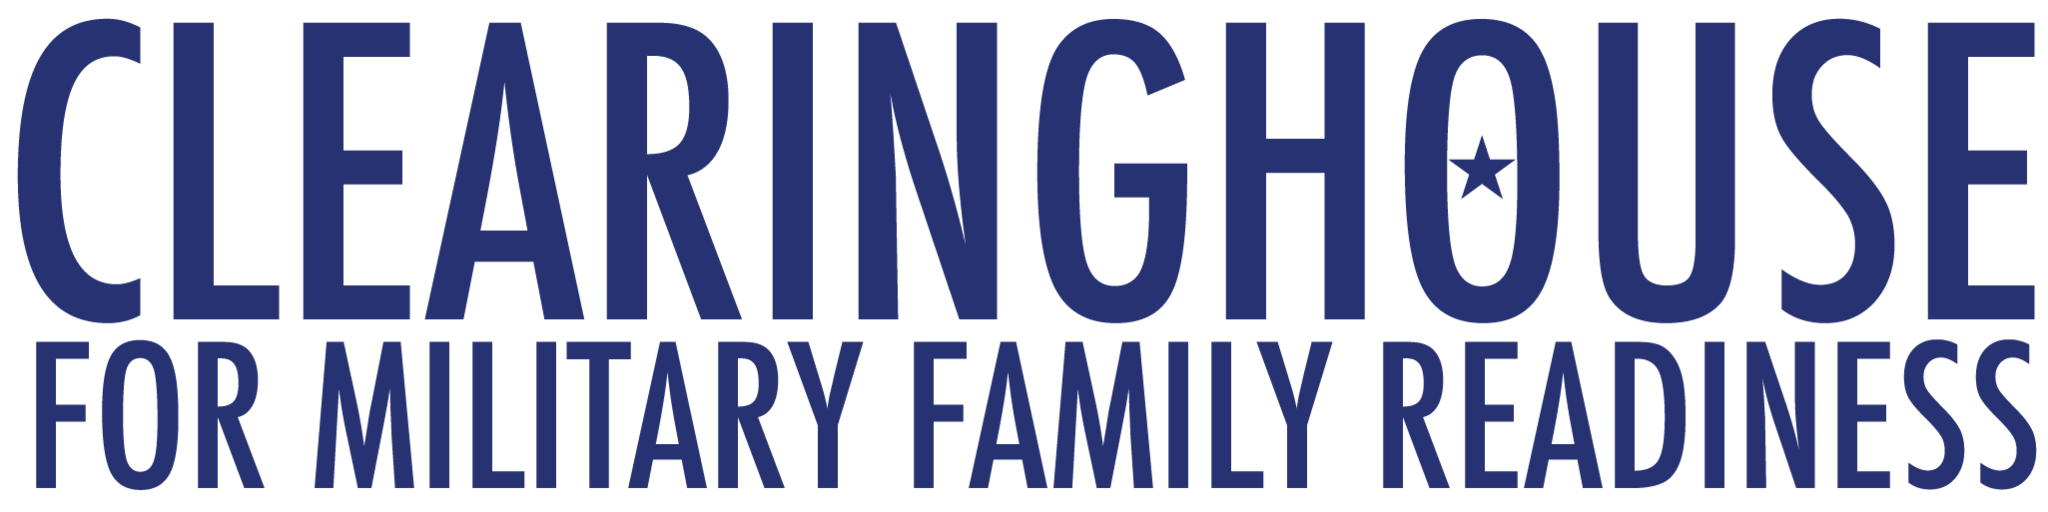 Military Clearinghouse for Family Readiness logo